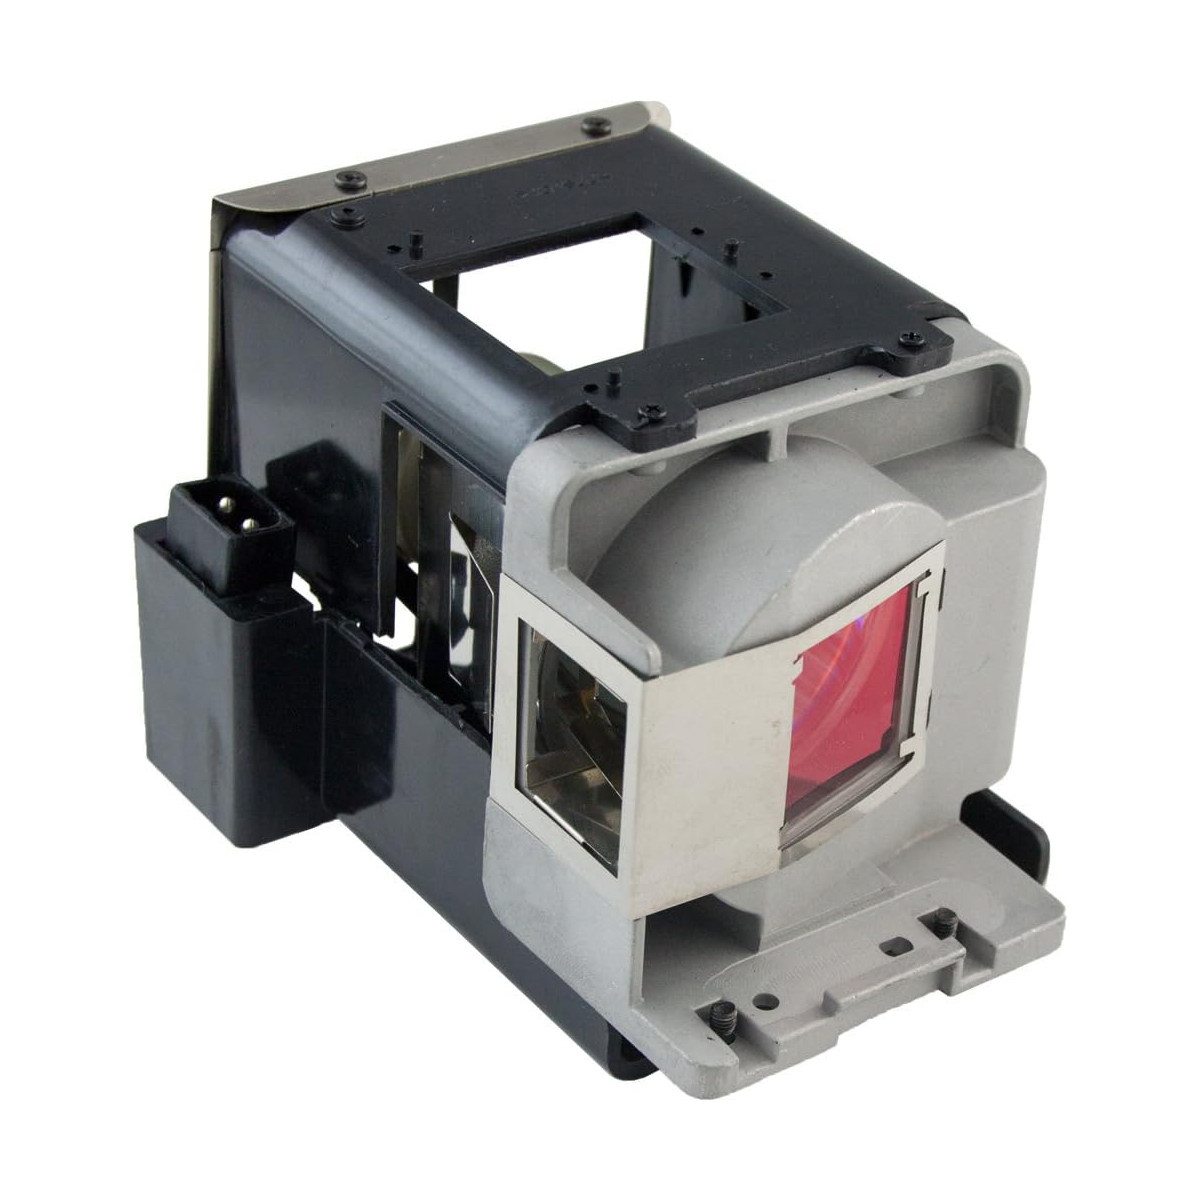 Replacement Projector lamp RLC-059 For VIEWSONIC Pro8500 Pro8400 Pro8450